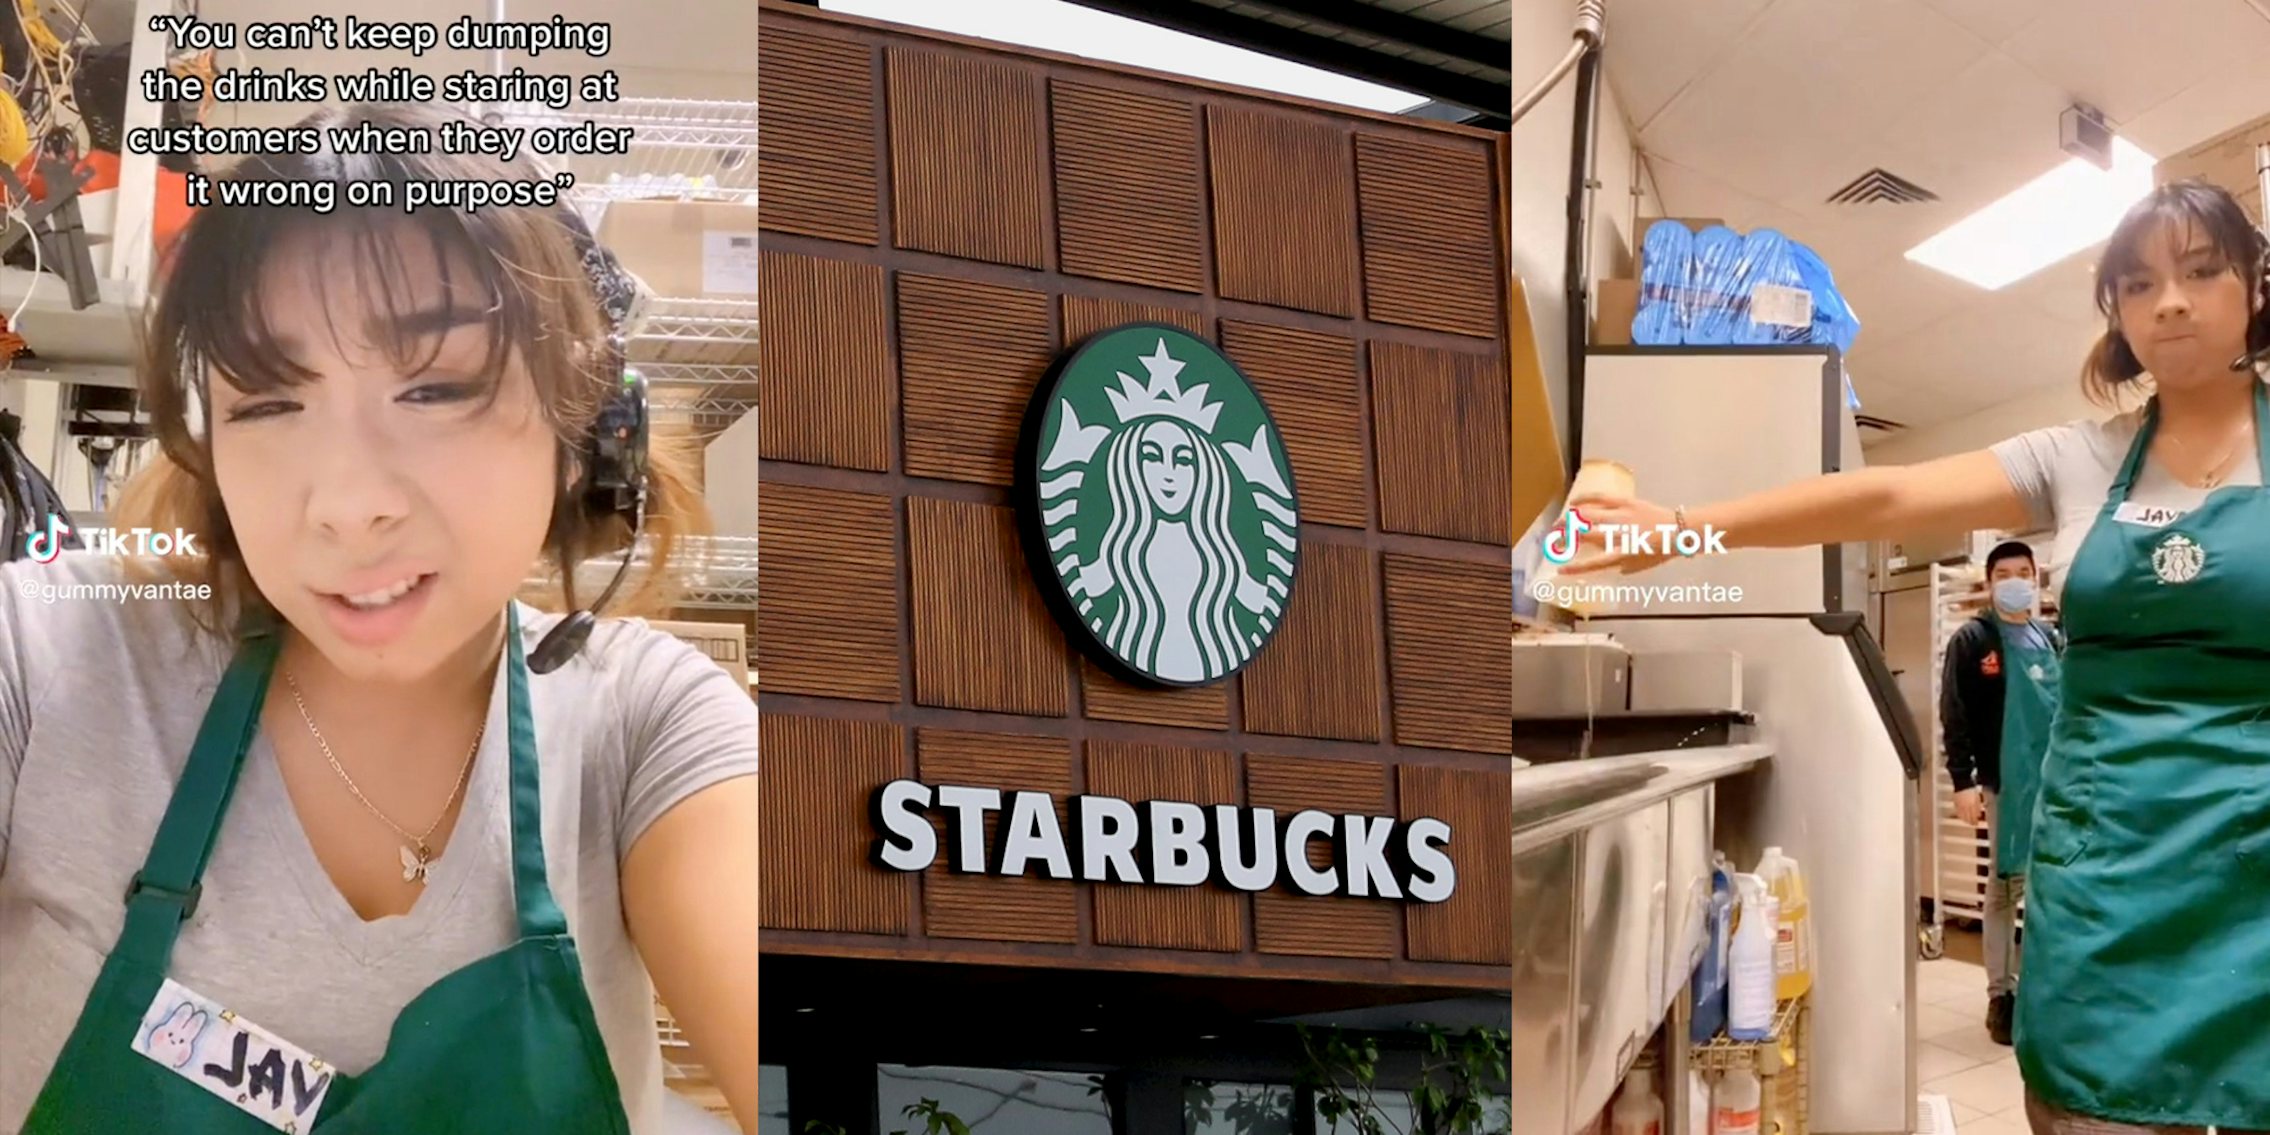 Starbucks barista says she dumps out customer's drink orders when they order it wrong on purpose